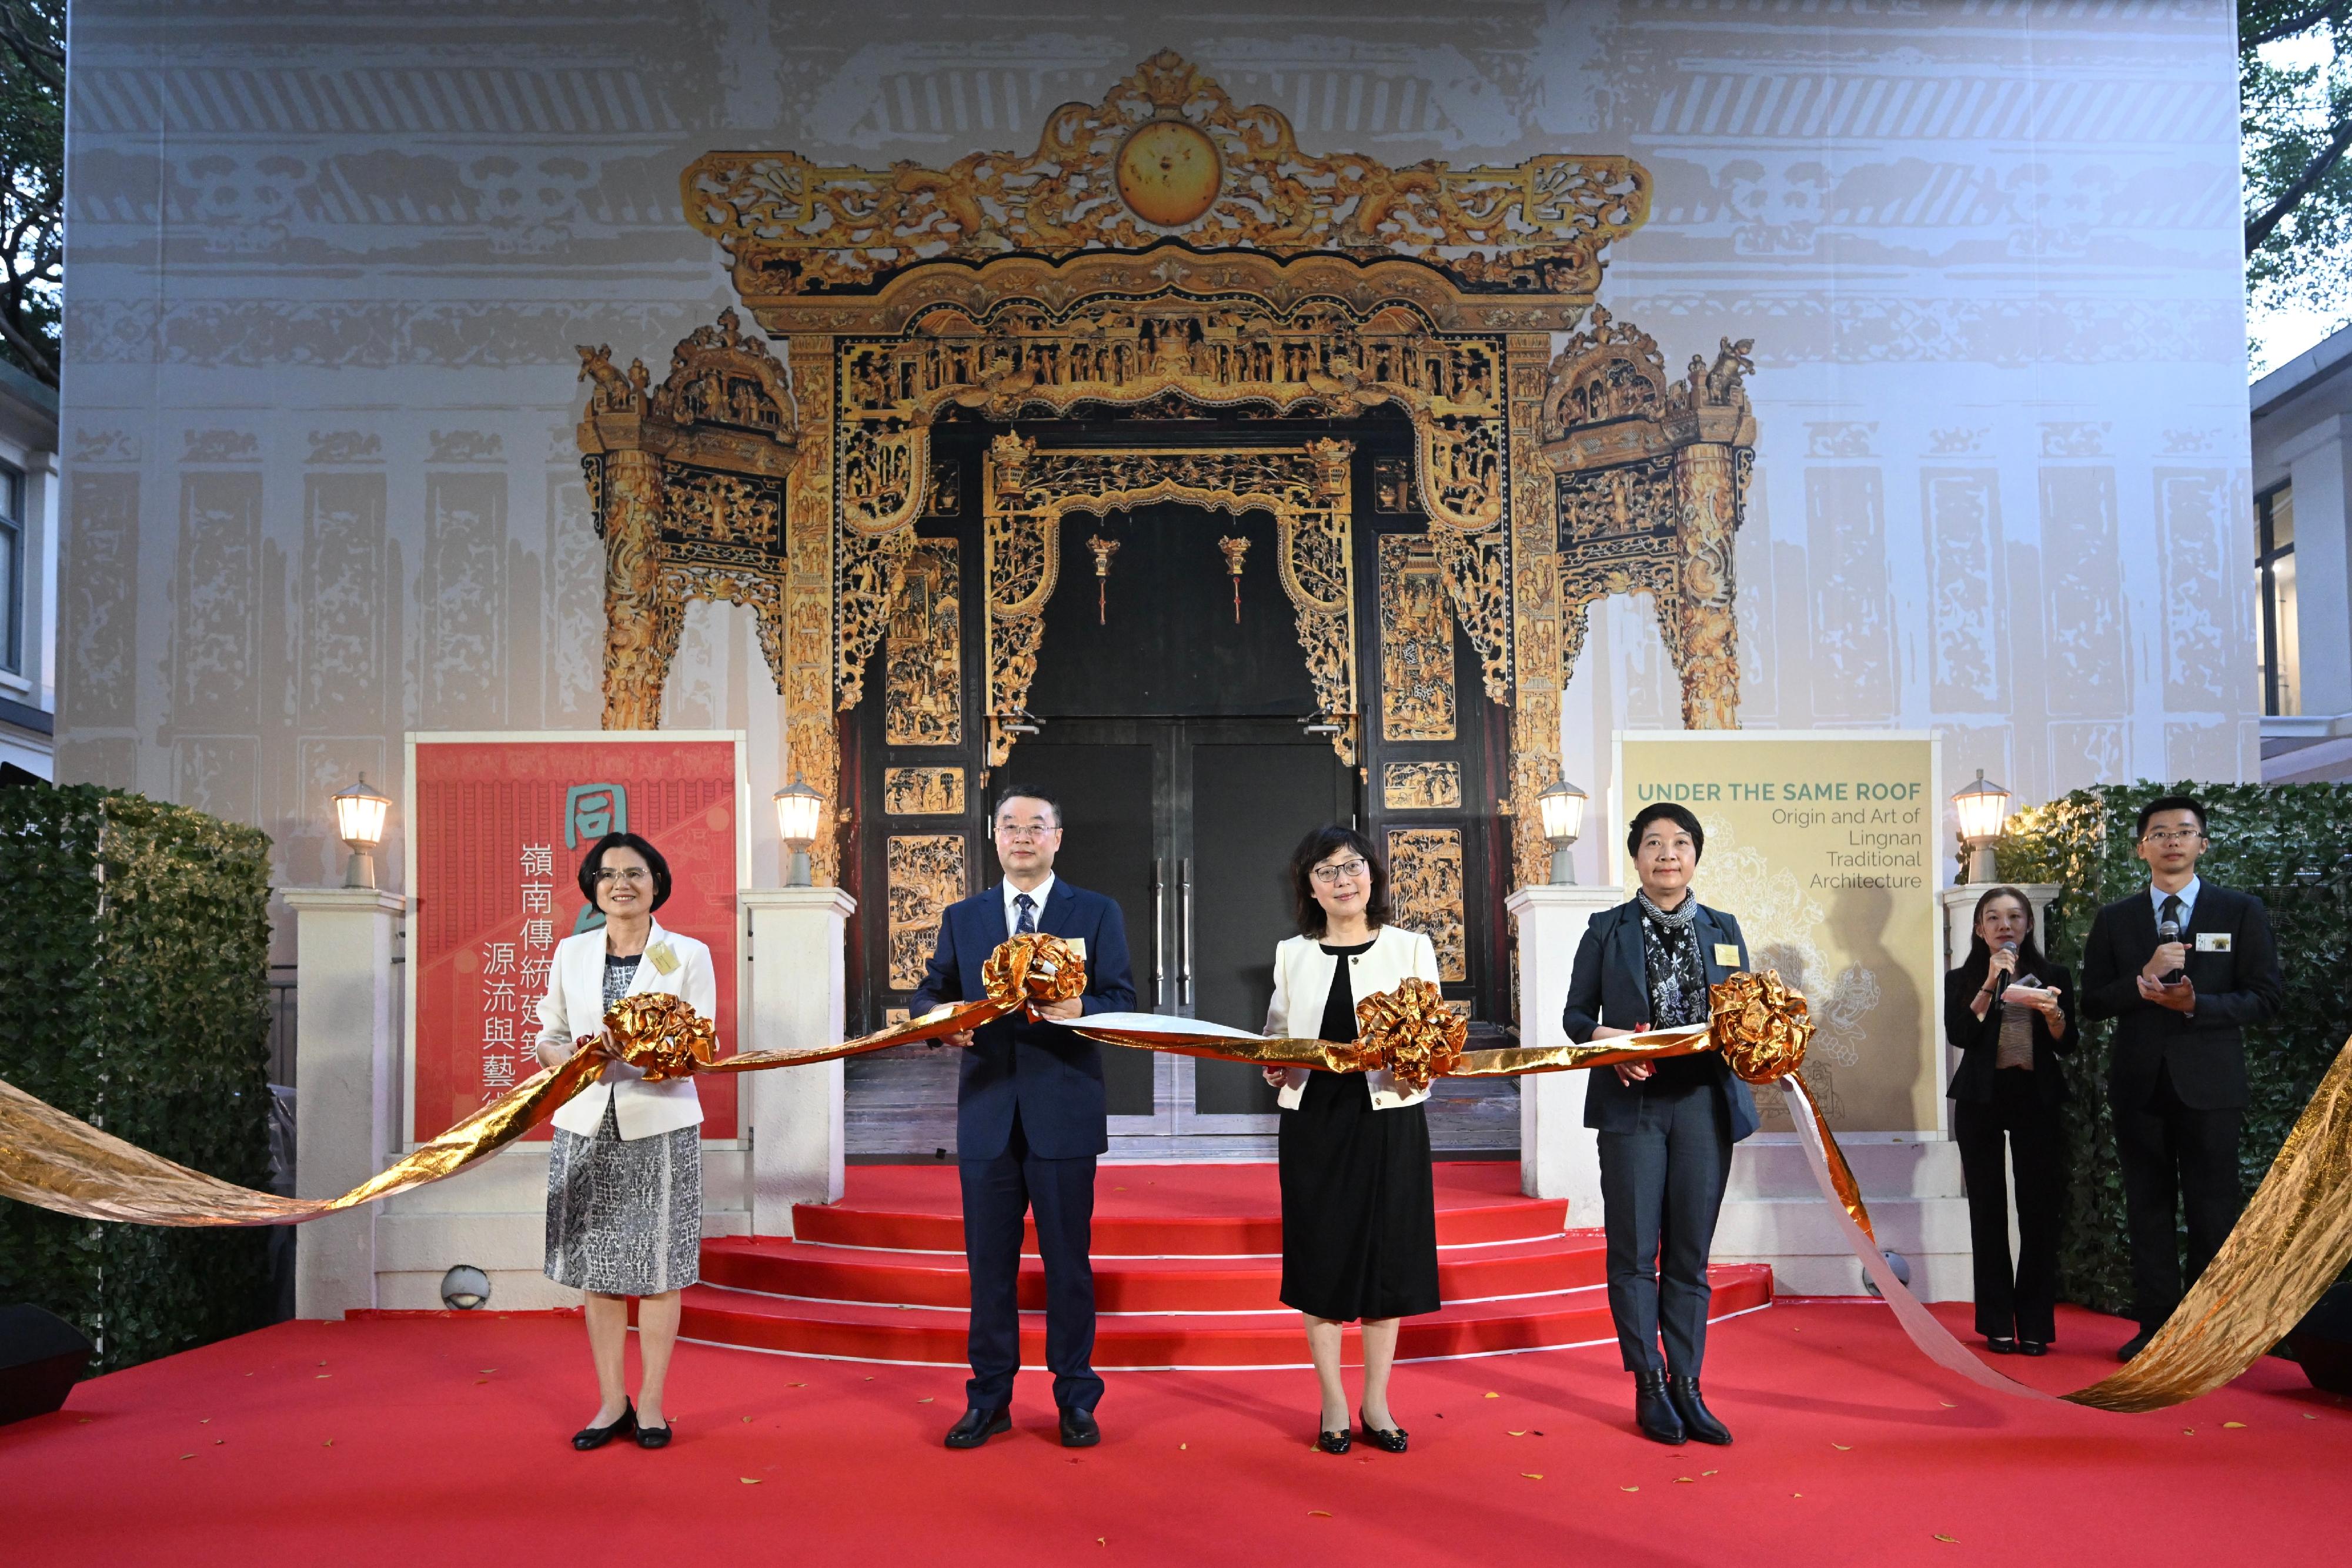 Exhibition of Chinese traditional craft innovation opens in London